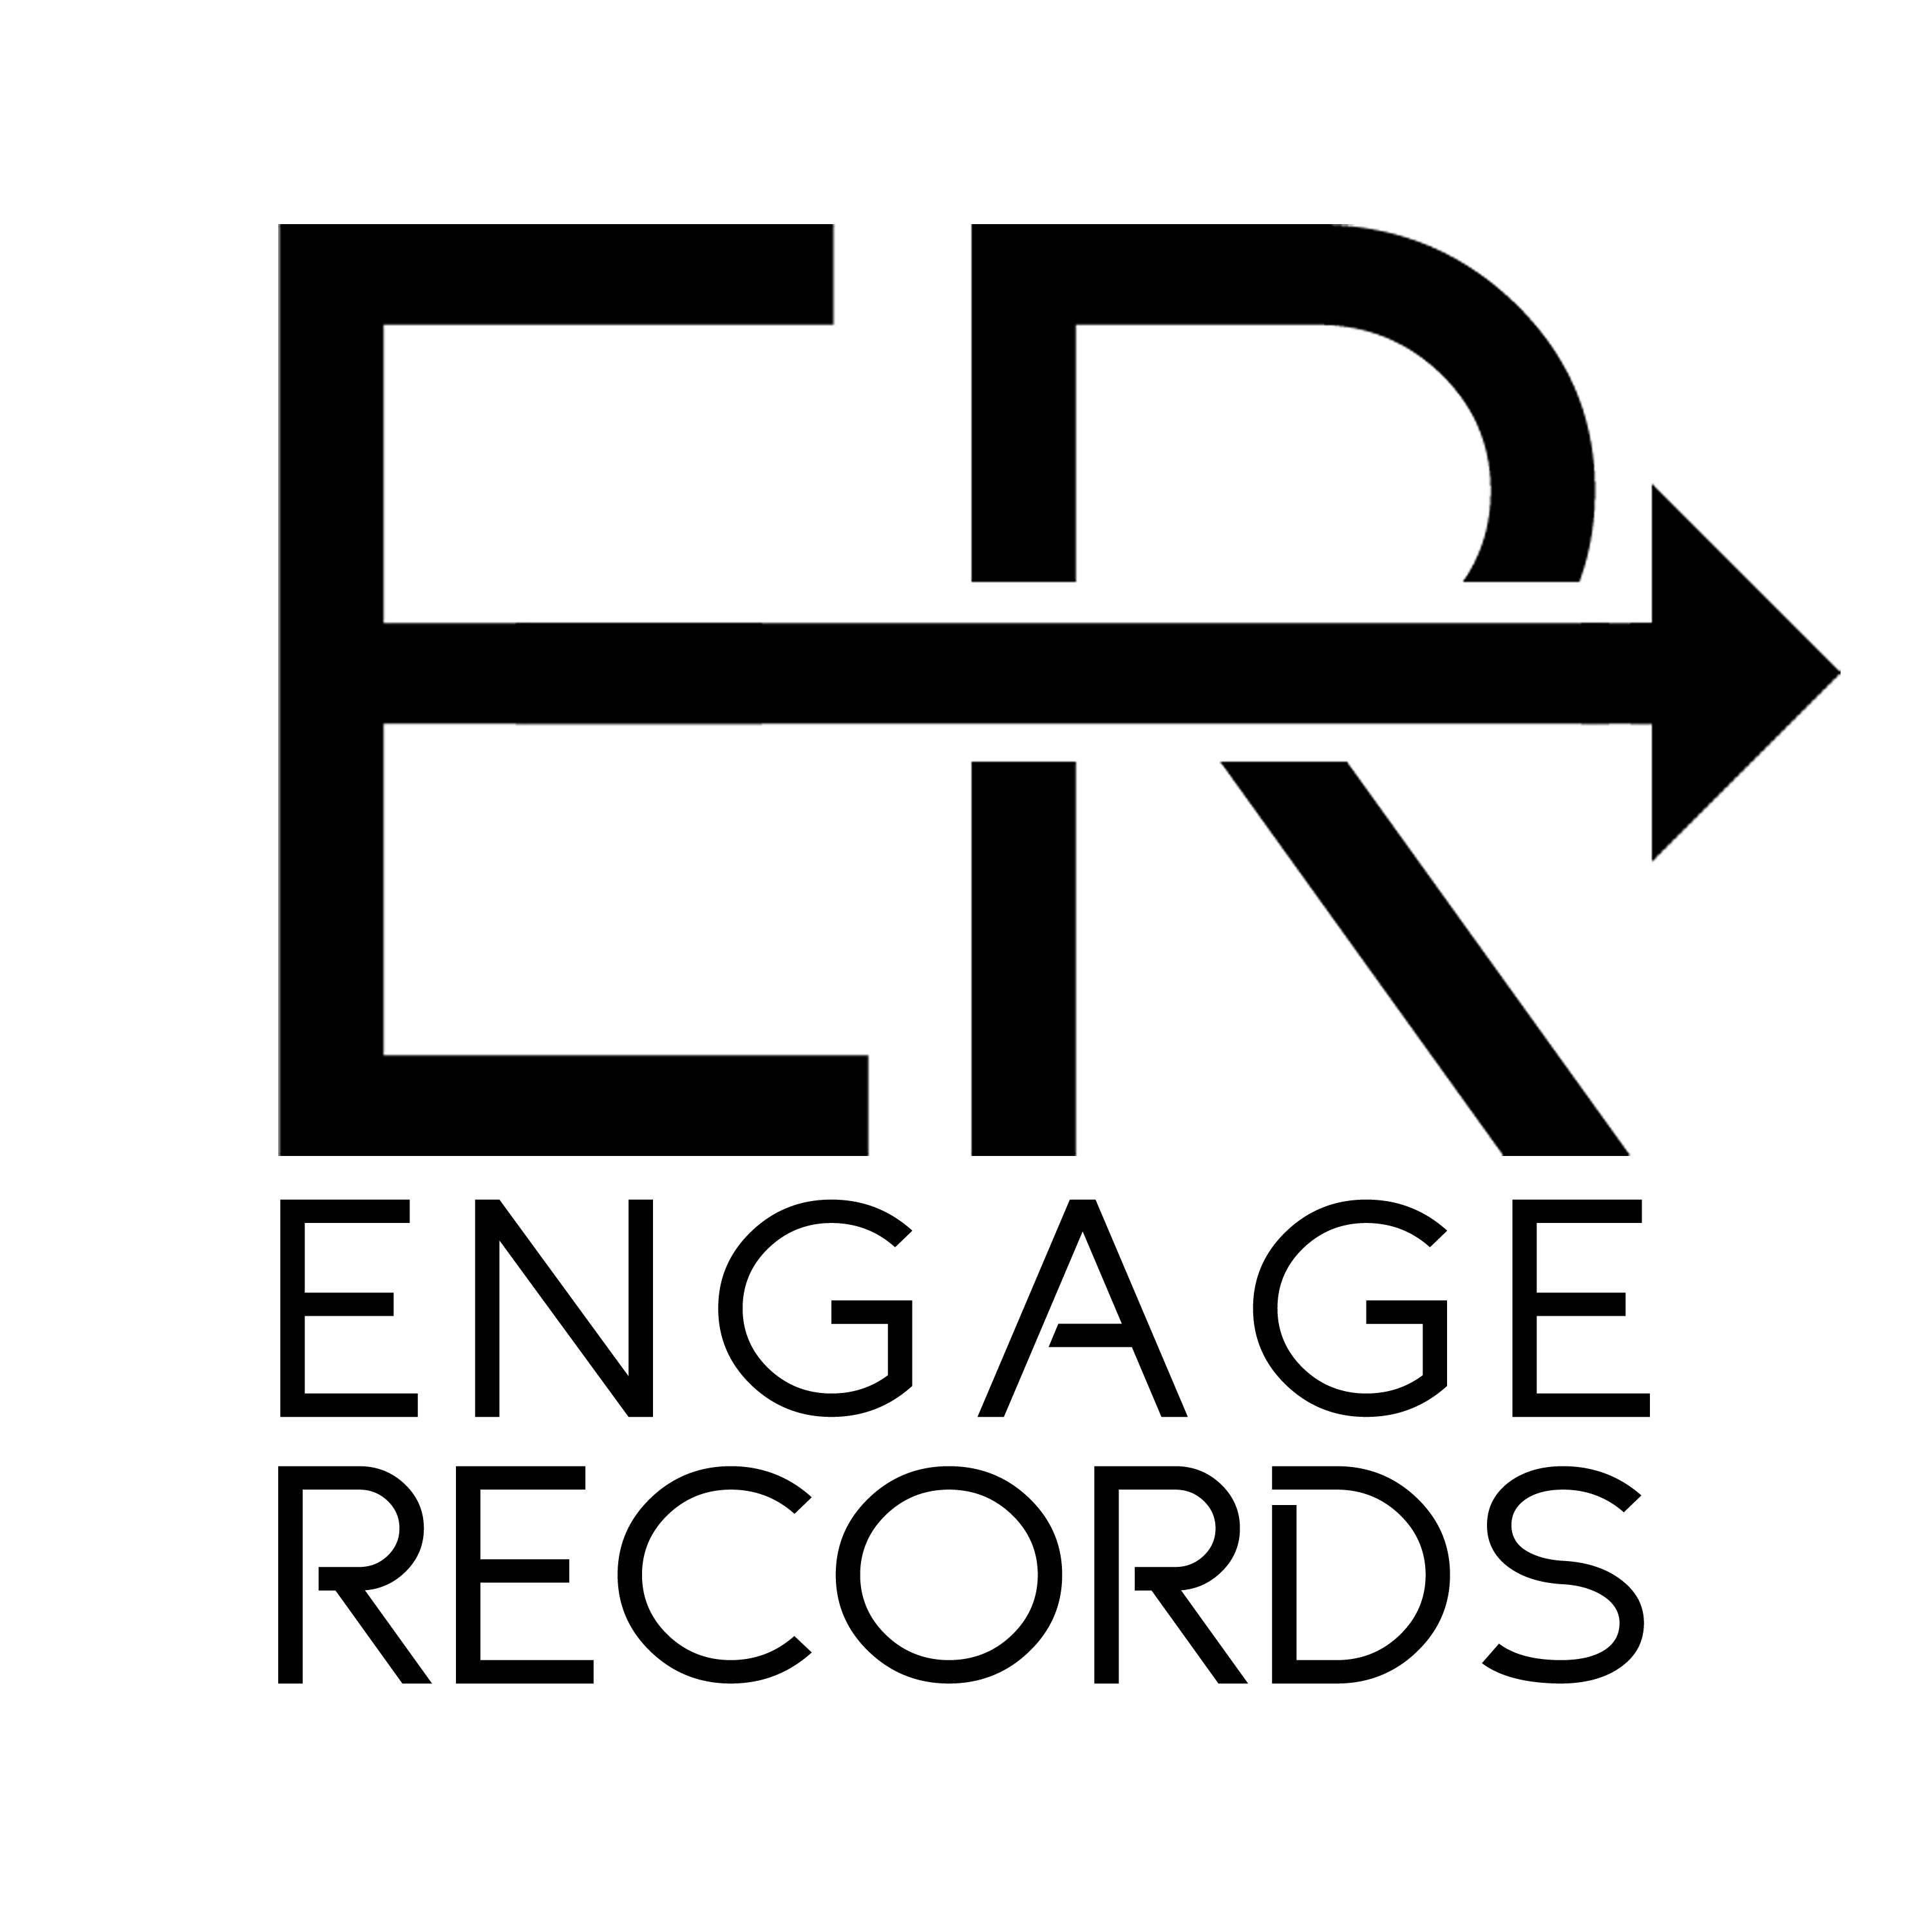 ENGAGE RECORDS